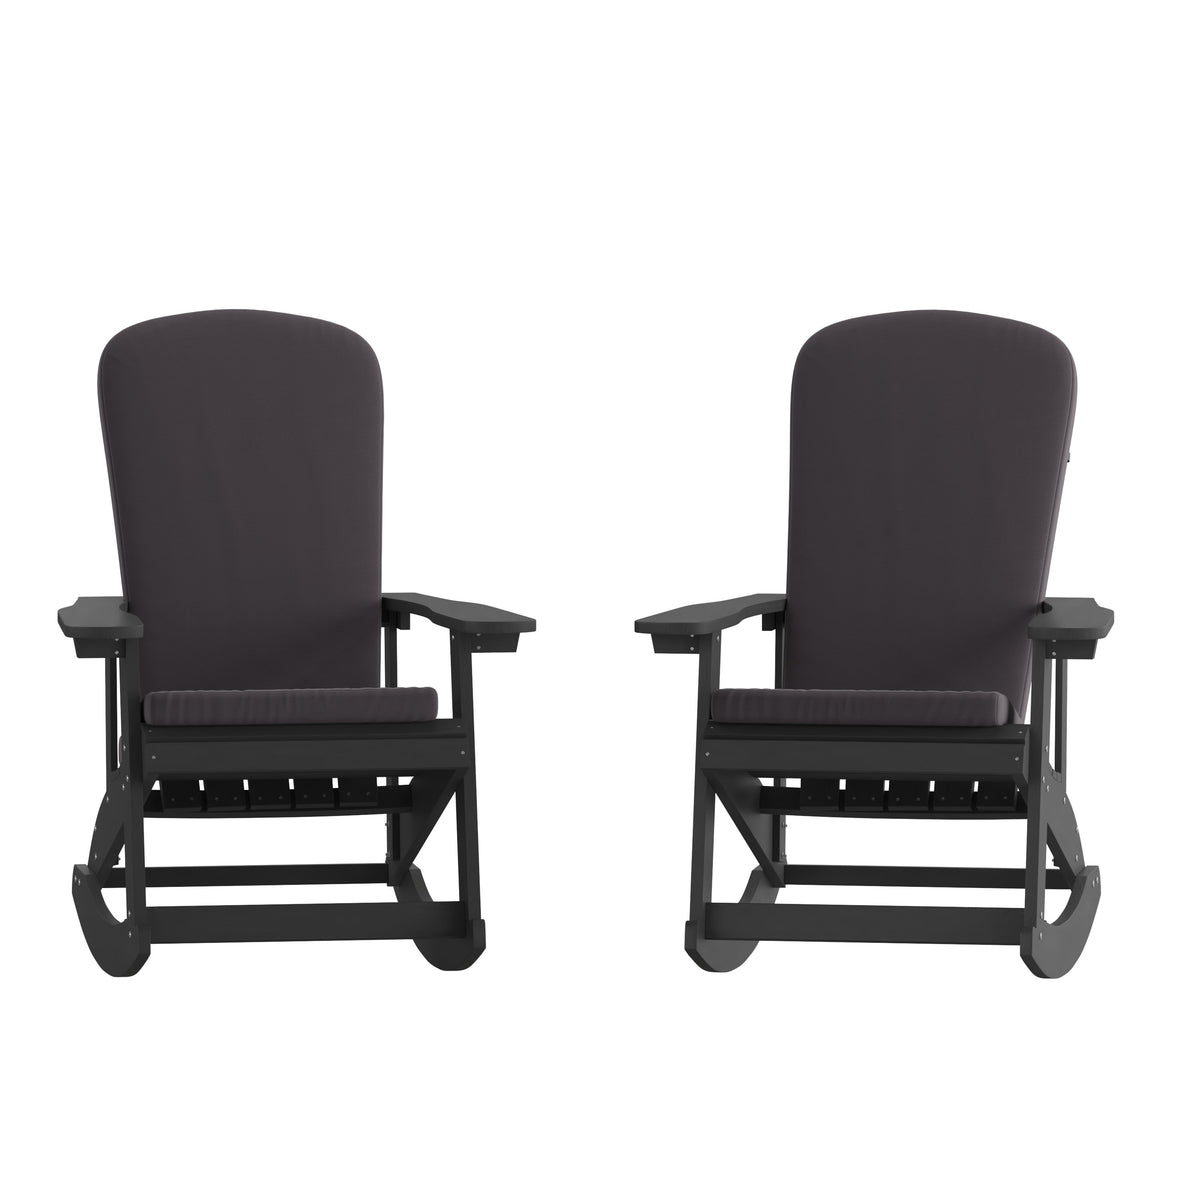 Black/Gray |#| Indoor/Outdoor Black Rocking Adirondack Chairs with Gray Cushions - Set of 2